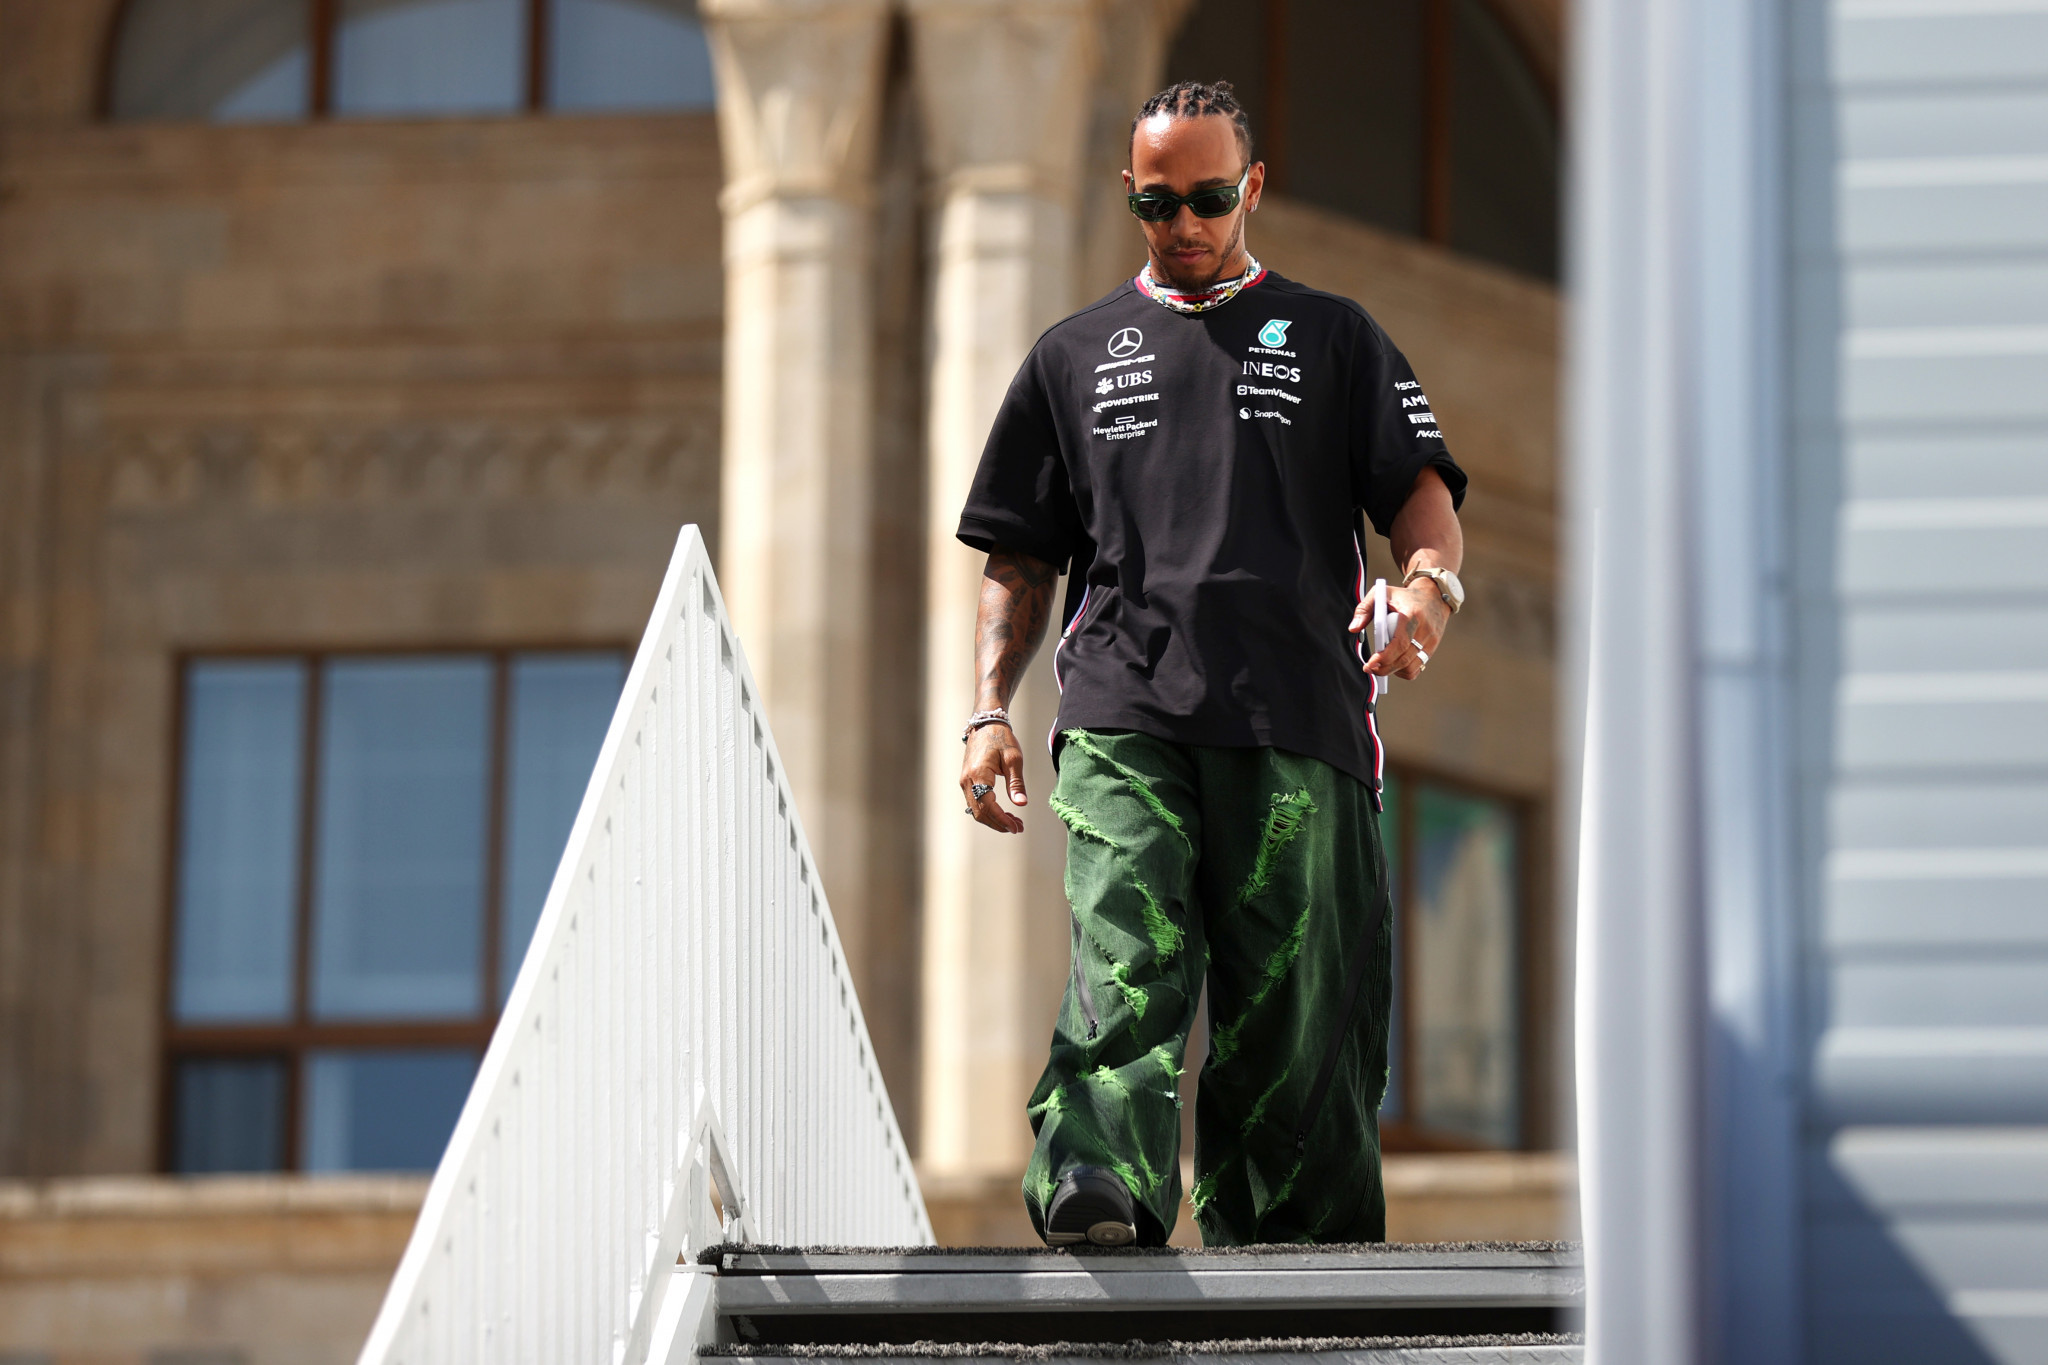 The Dutchman's Mercedes rival Lewis Hamilton is another of a trio that could make history in Baku ©Getty Images